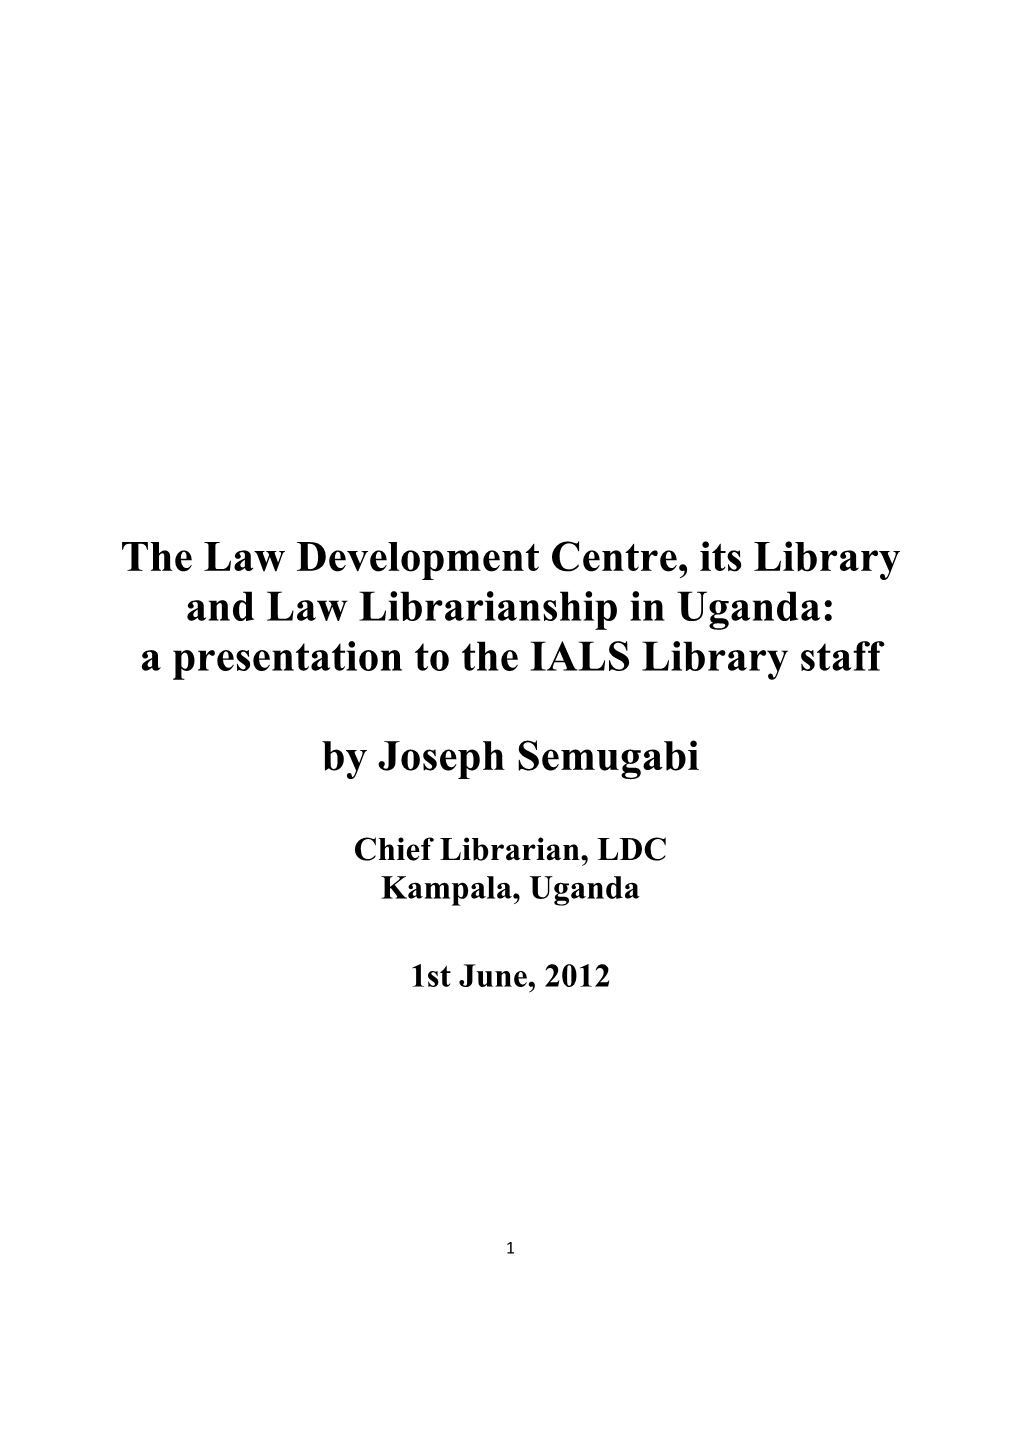 The Law Development Centre, Its Library and Law Librarianship in Uganda: a Presentation to the IALS Library Staff